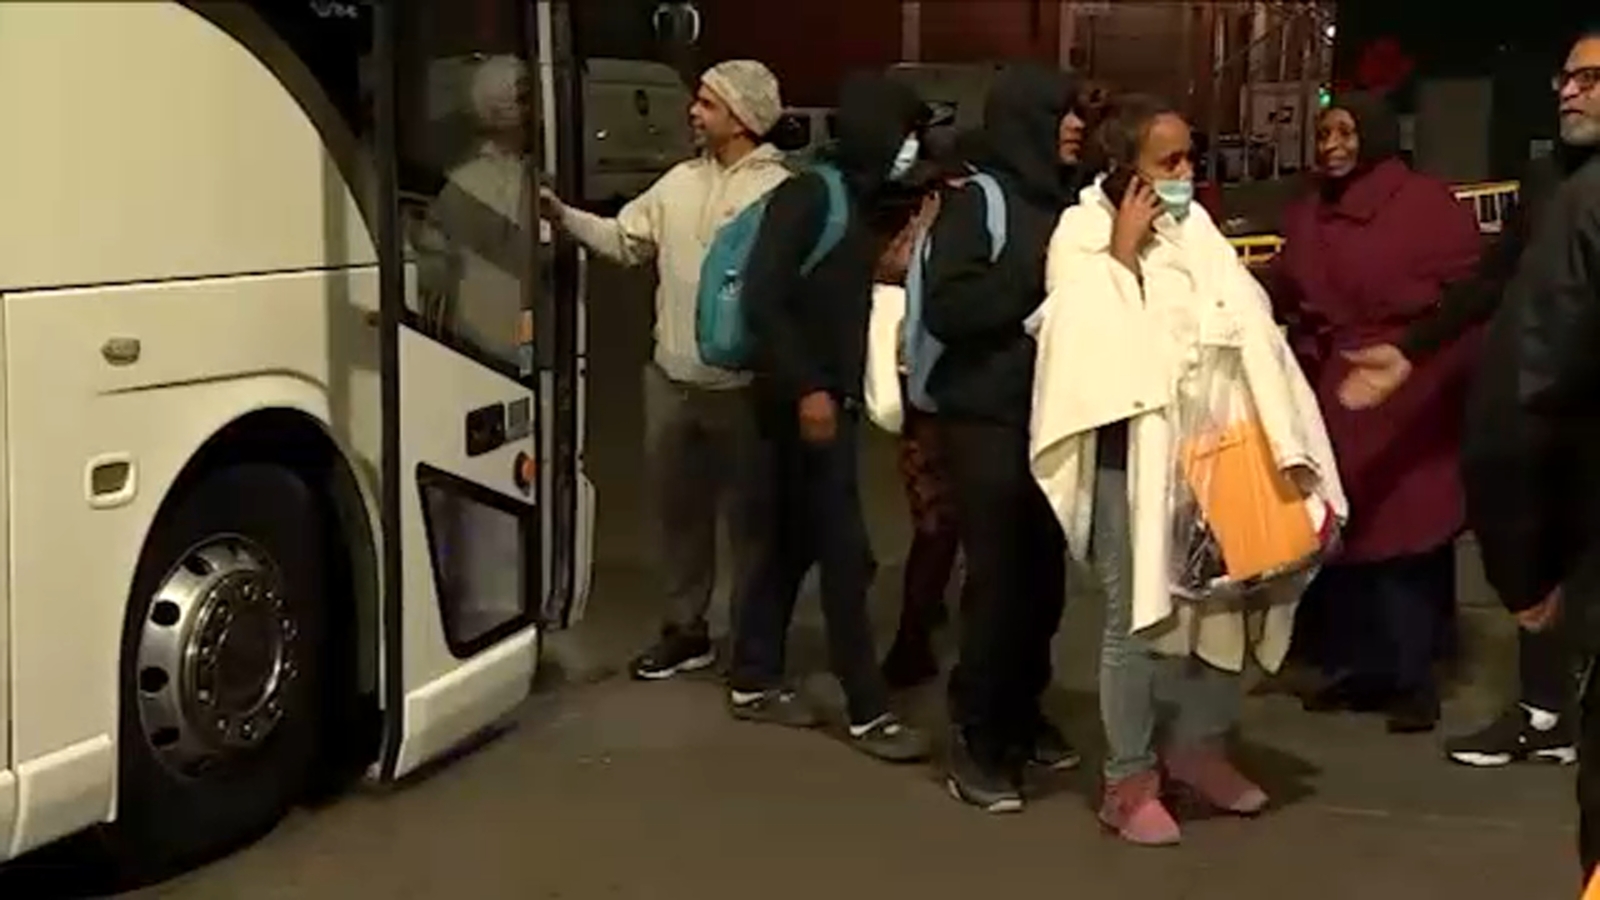 Texas governor busing more migrants to NYC, Chicago as Title 42 expected to be lifted